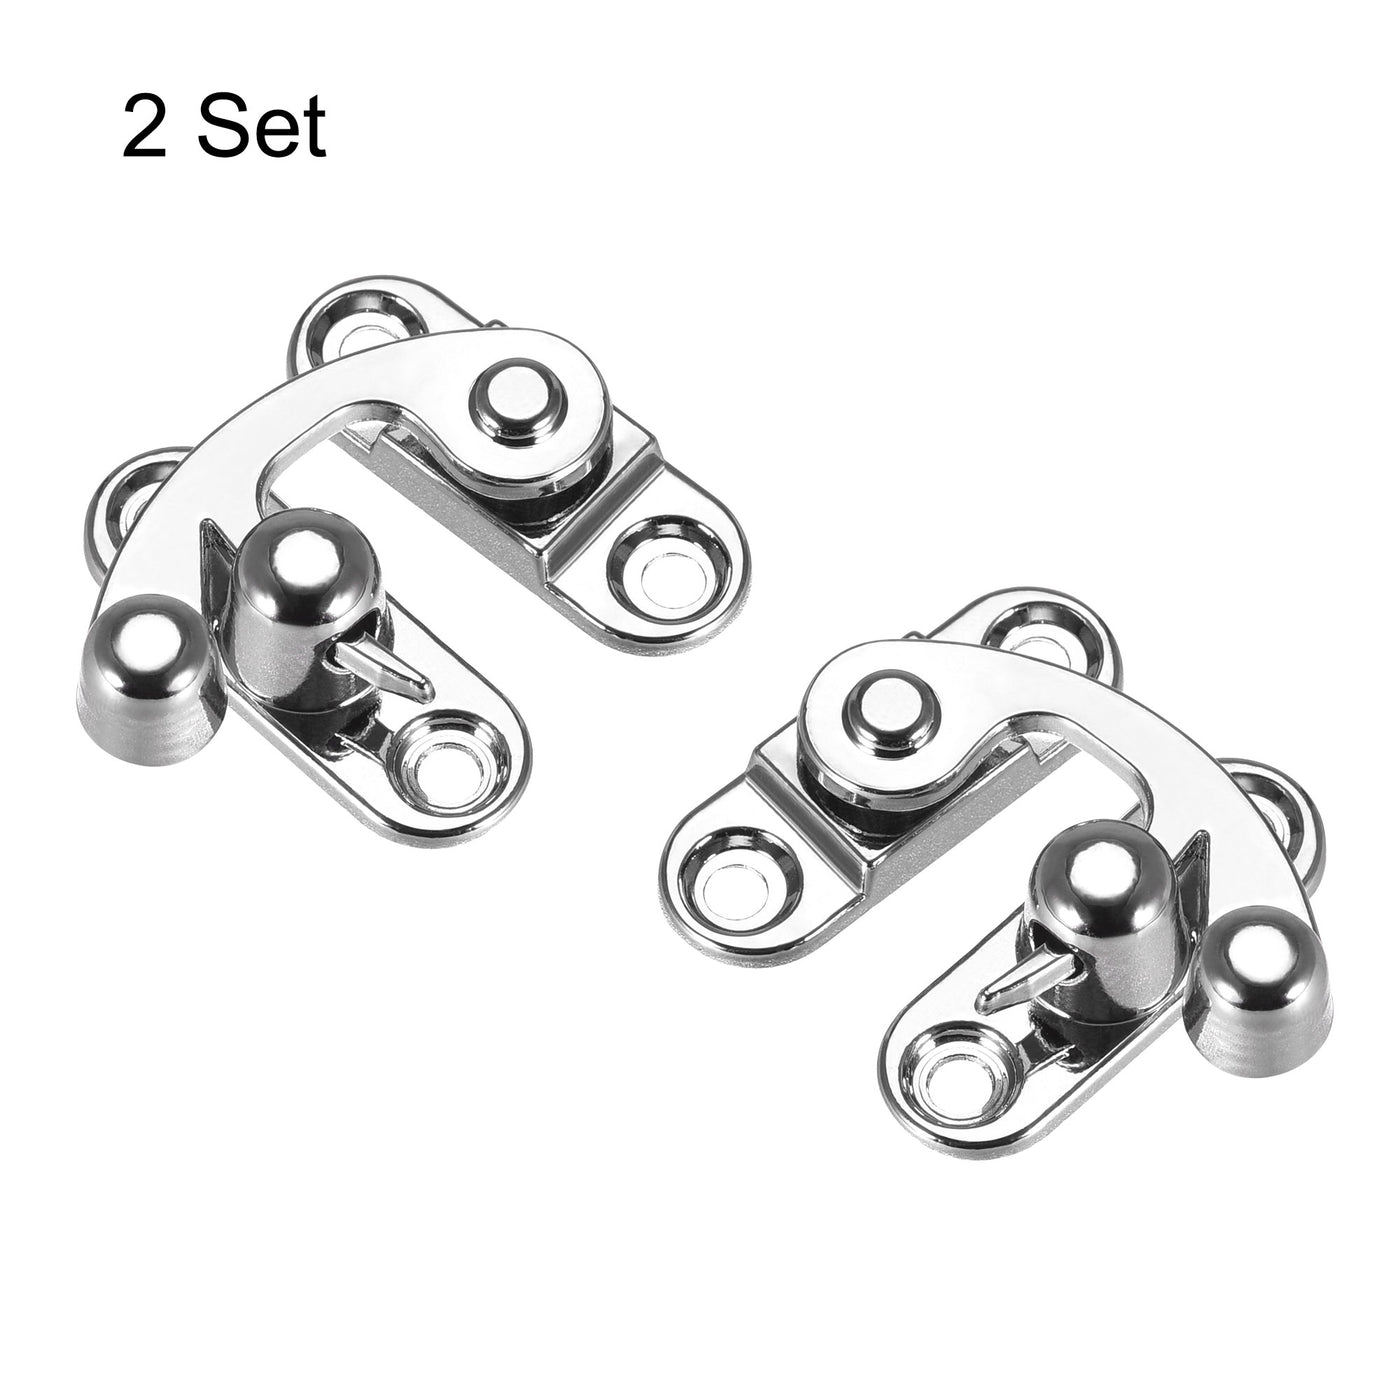 uxcell Uxcell Decorative Antique Right and Left Latch Hook Hasp Swing Arm Latch Silver Tone 2 Set